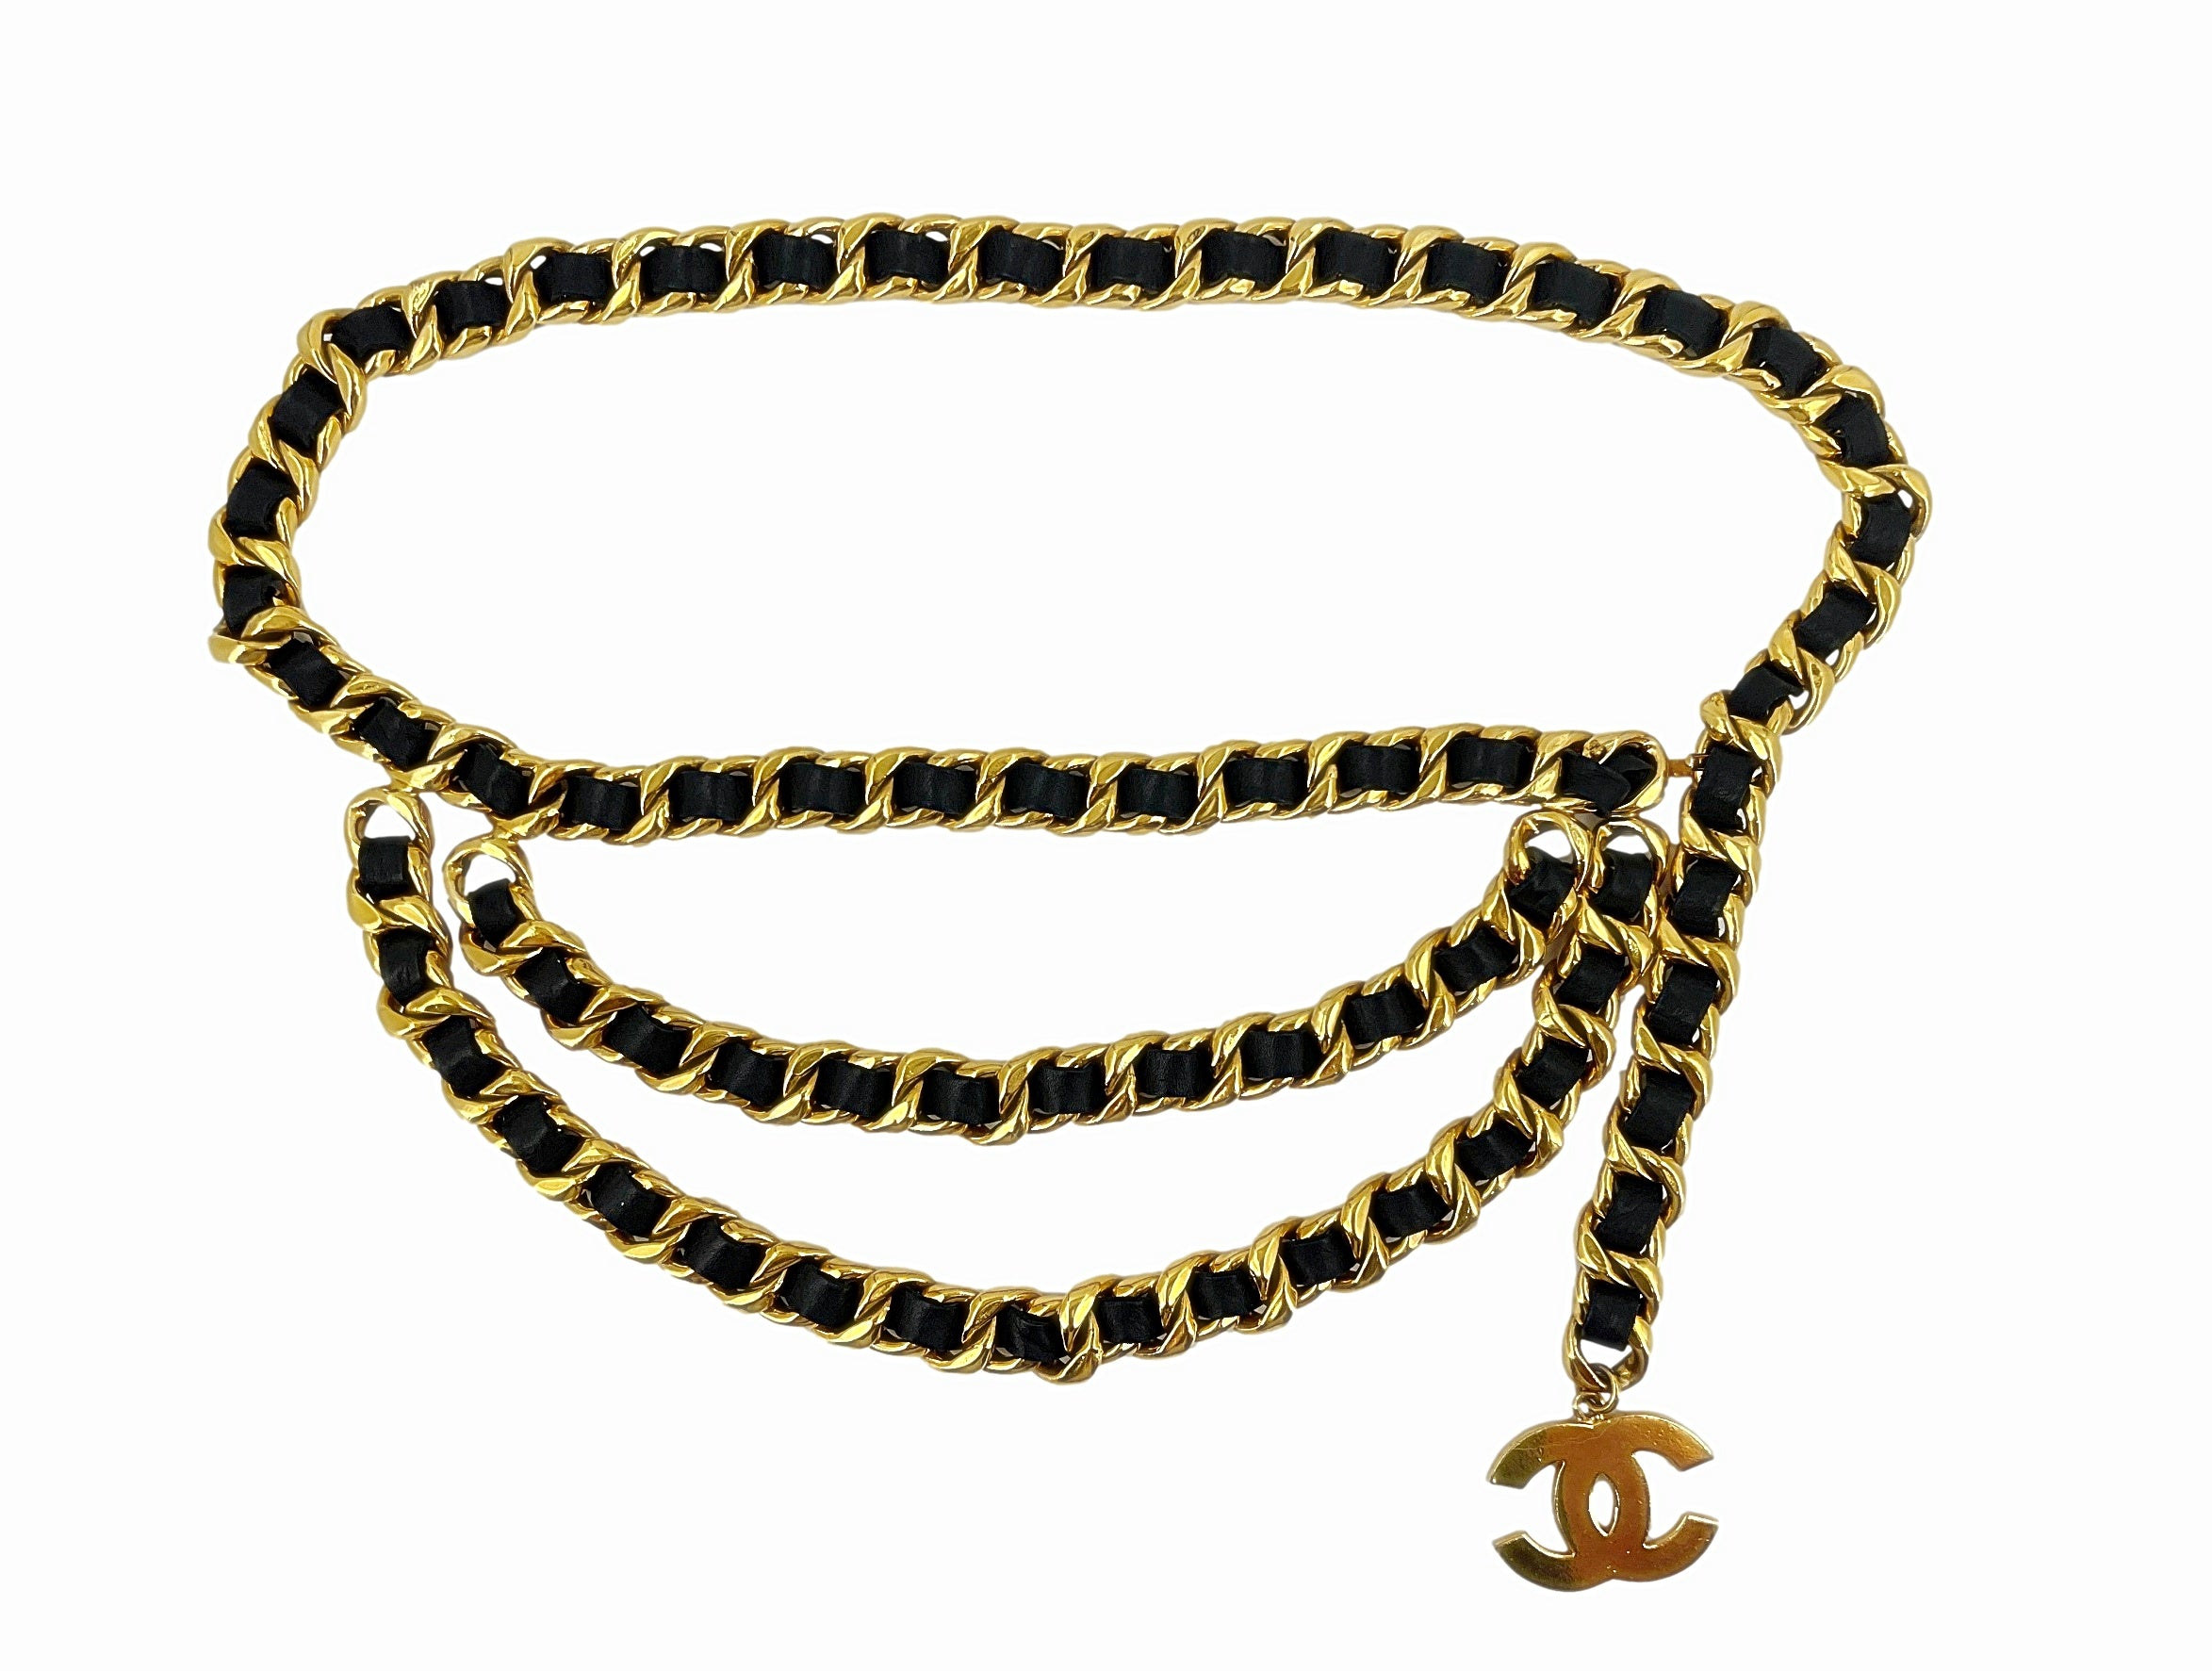 Vintage Chanel Black Leather Belt 1980s Gold Toned Chain Buckle